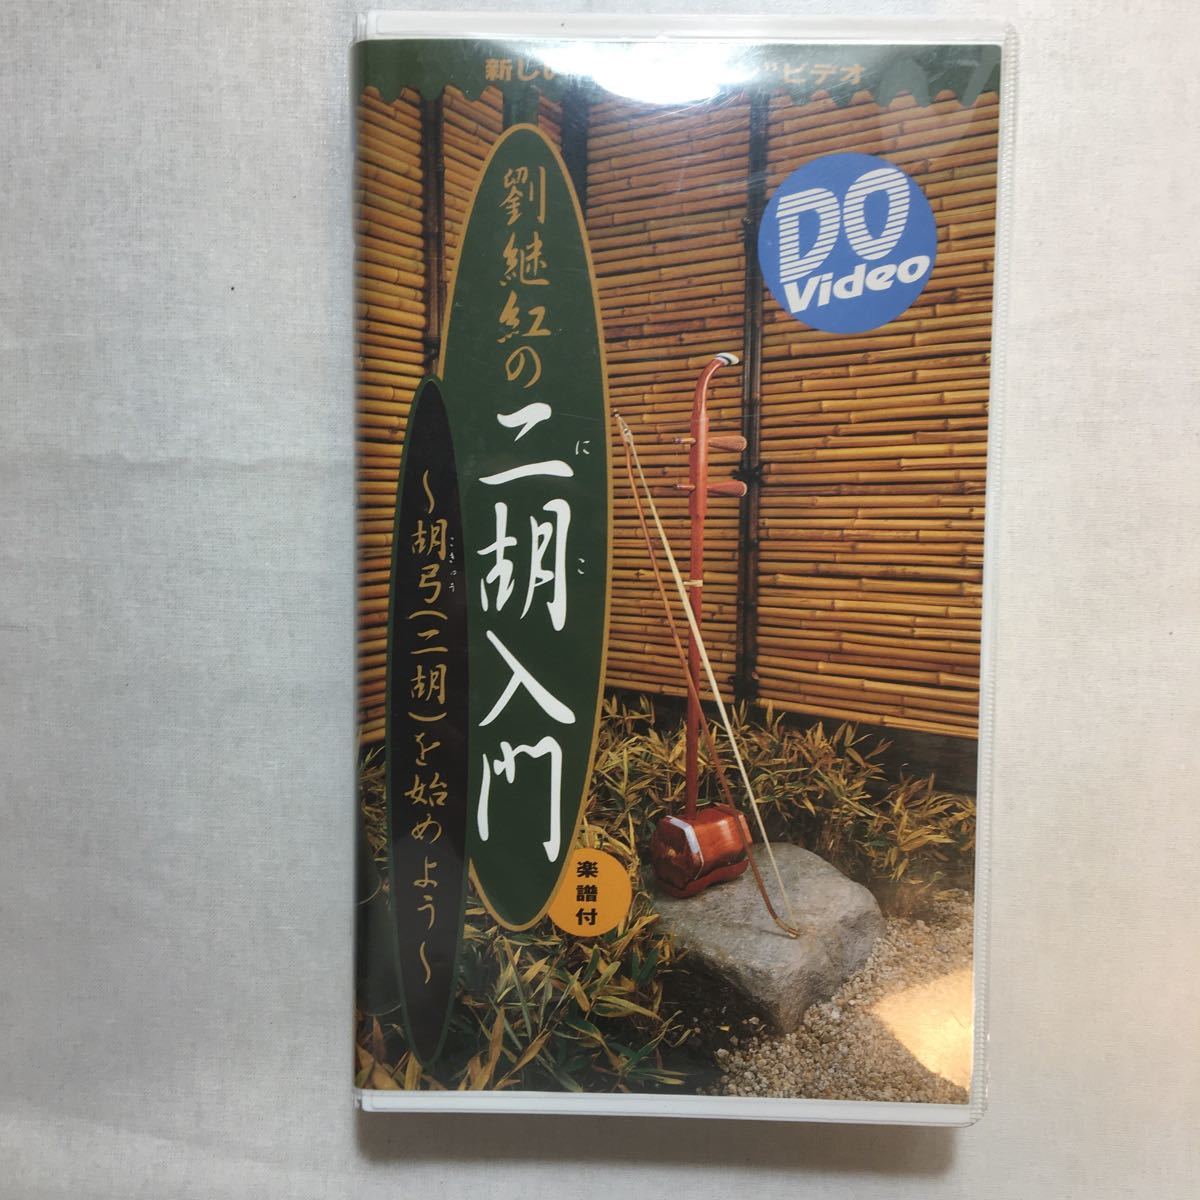 zvd-01!.... two . introduction ~ kokyu ( two .). let's start ~ 1998/1/1... corporation ink s( editing ) [VHS] video 